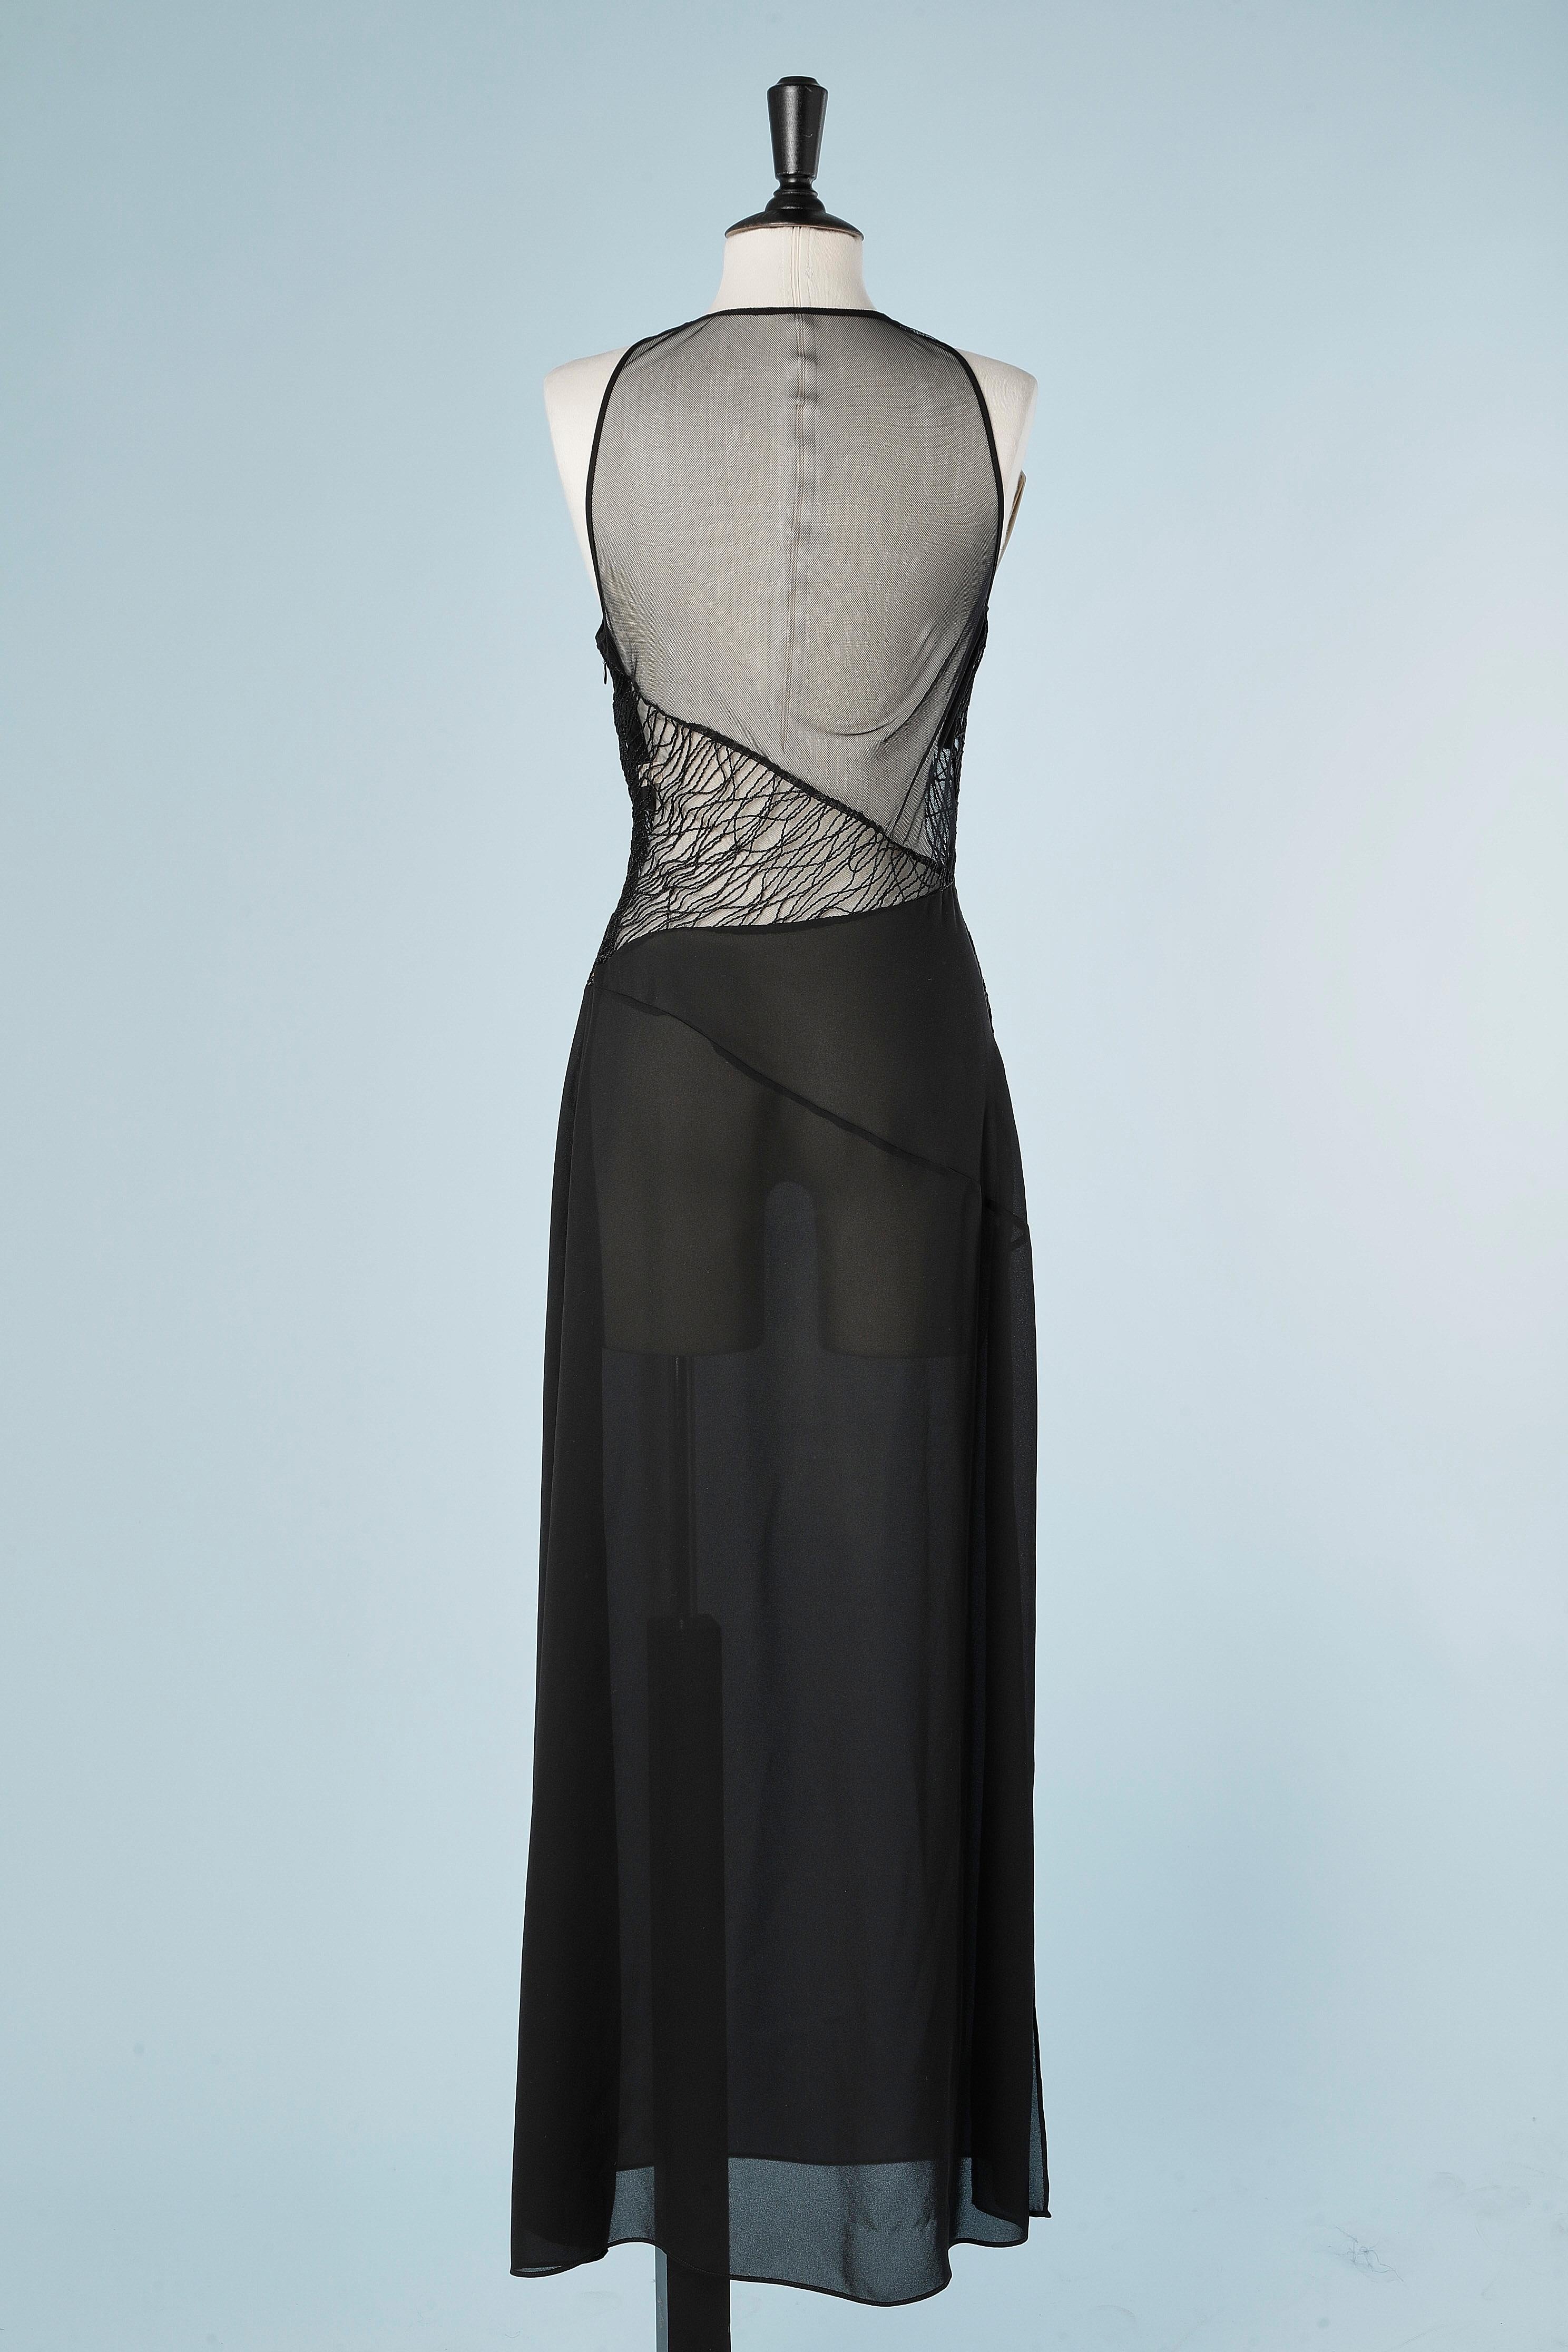 Black Evening dress in black see-through tulle and threads embroideries La Perla Ritmo